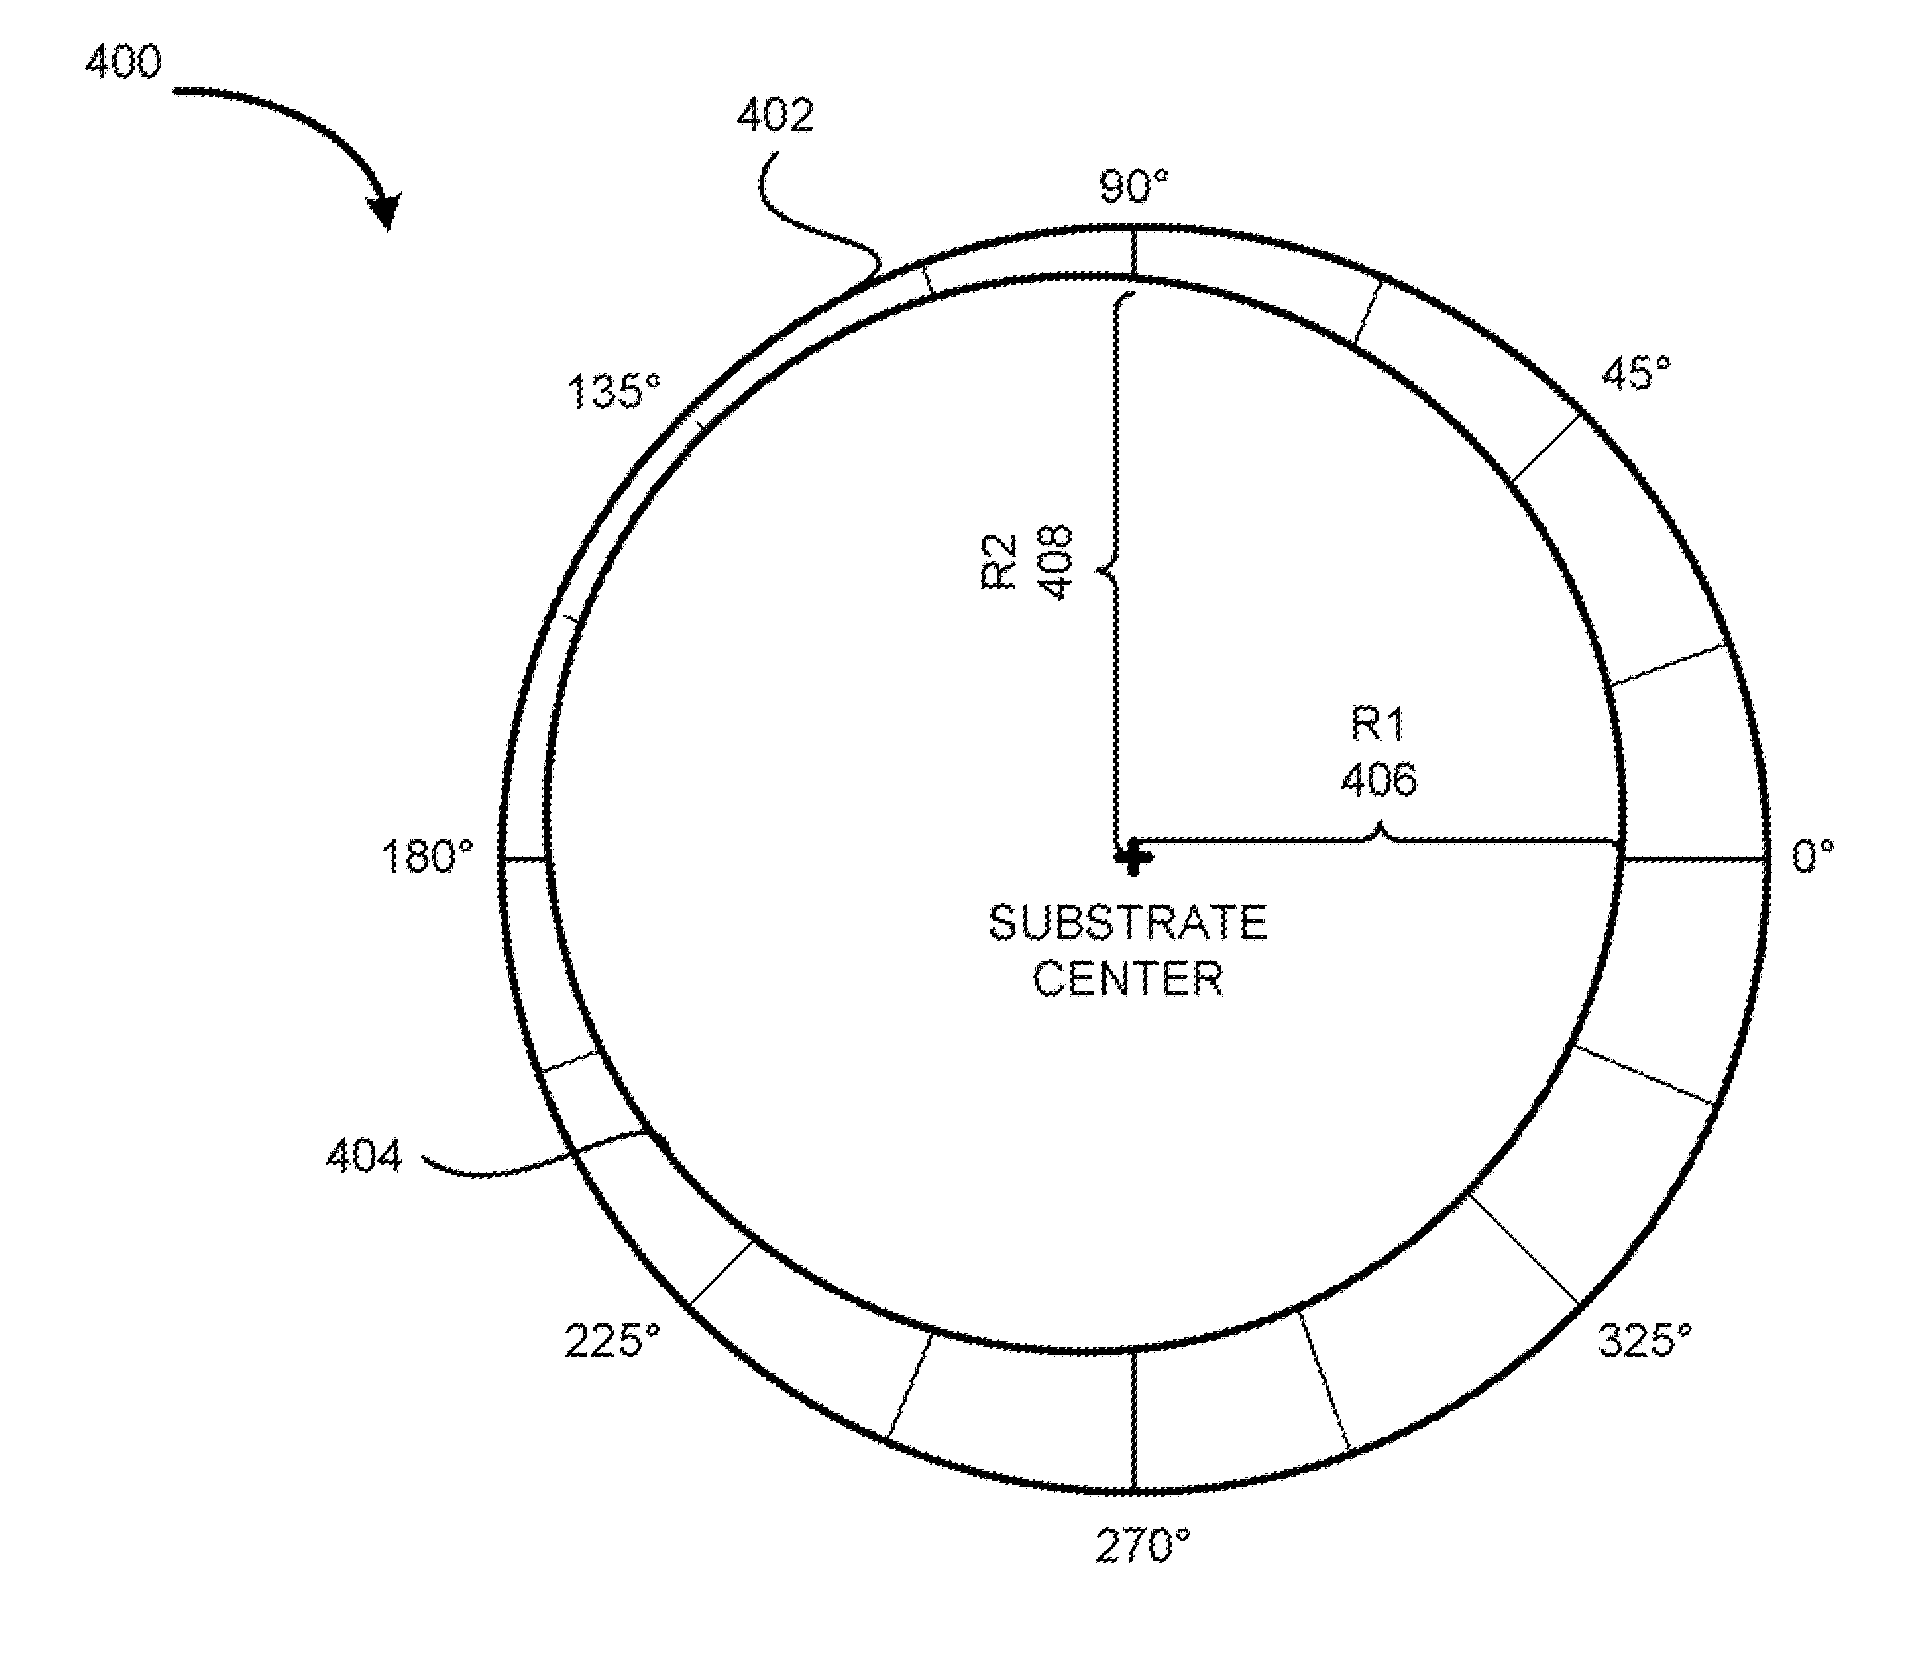 Offset correction techniques for positioning substrates within a processing chamber